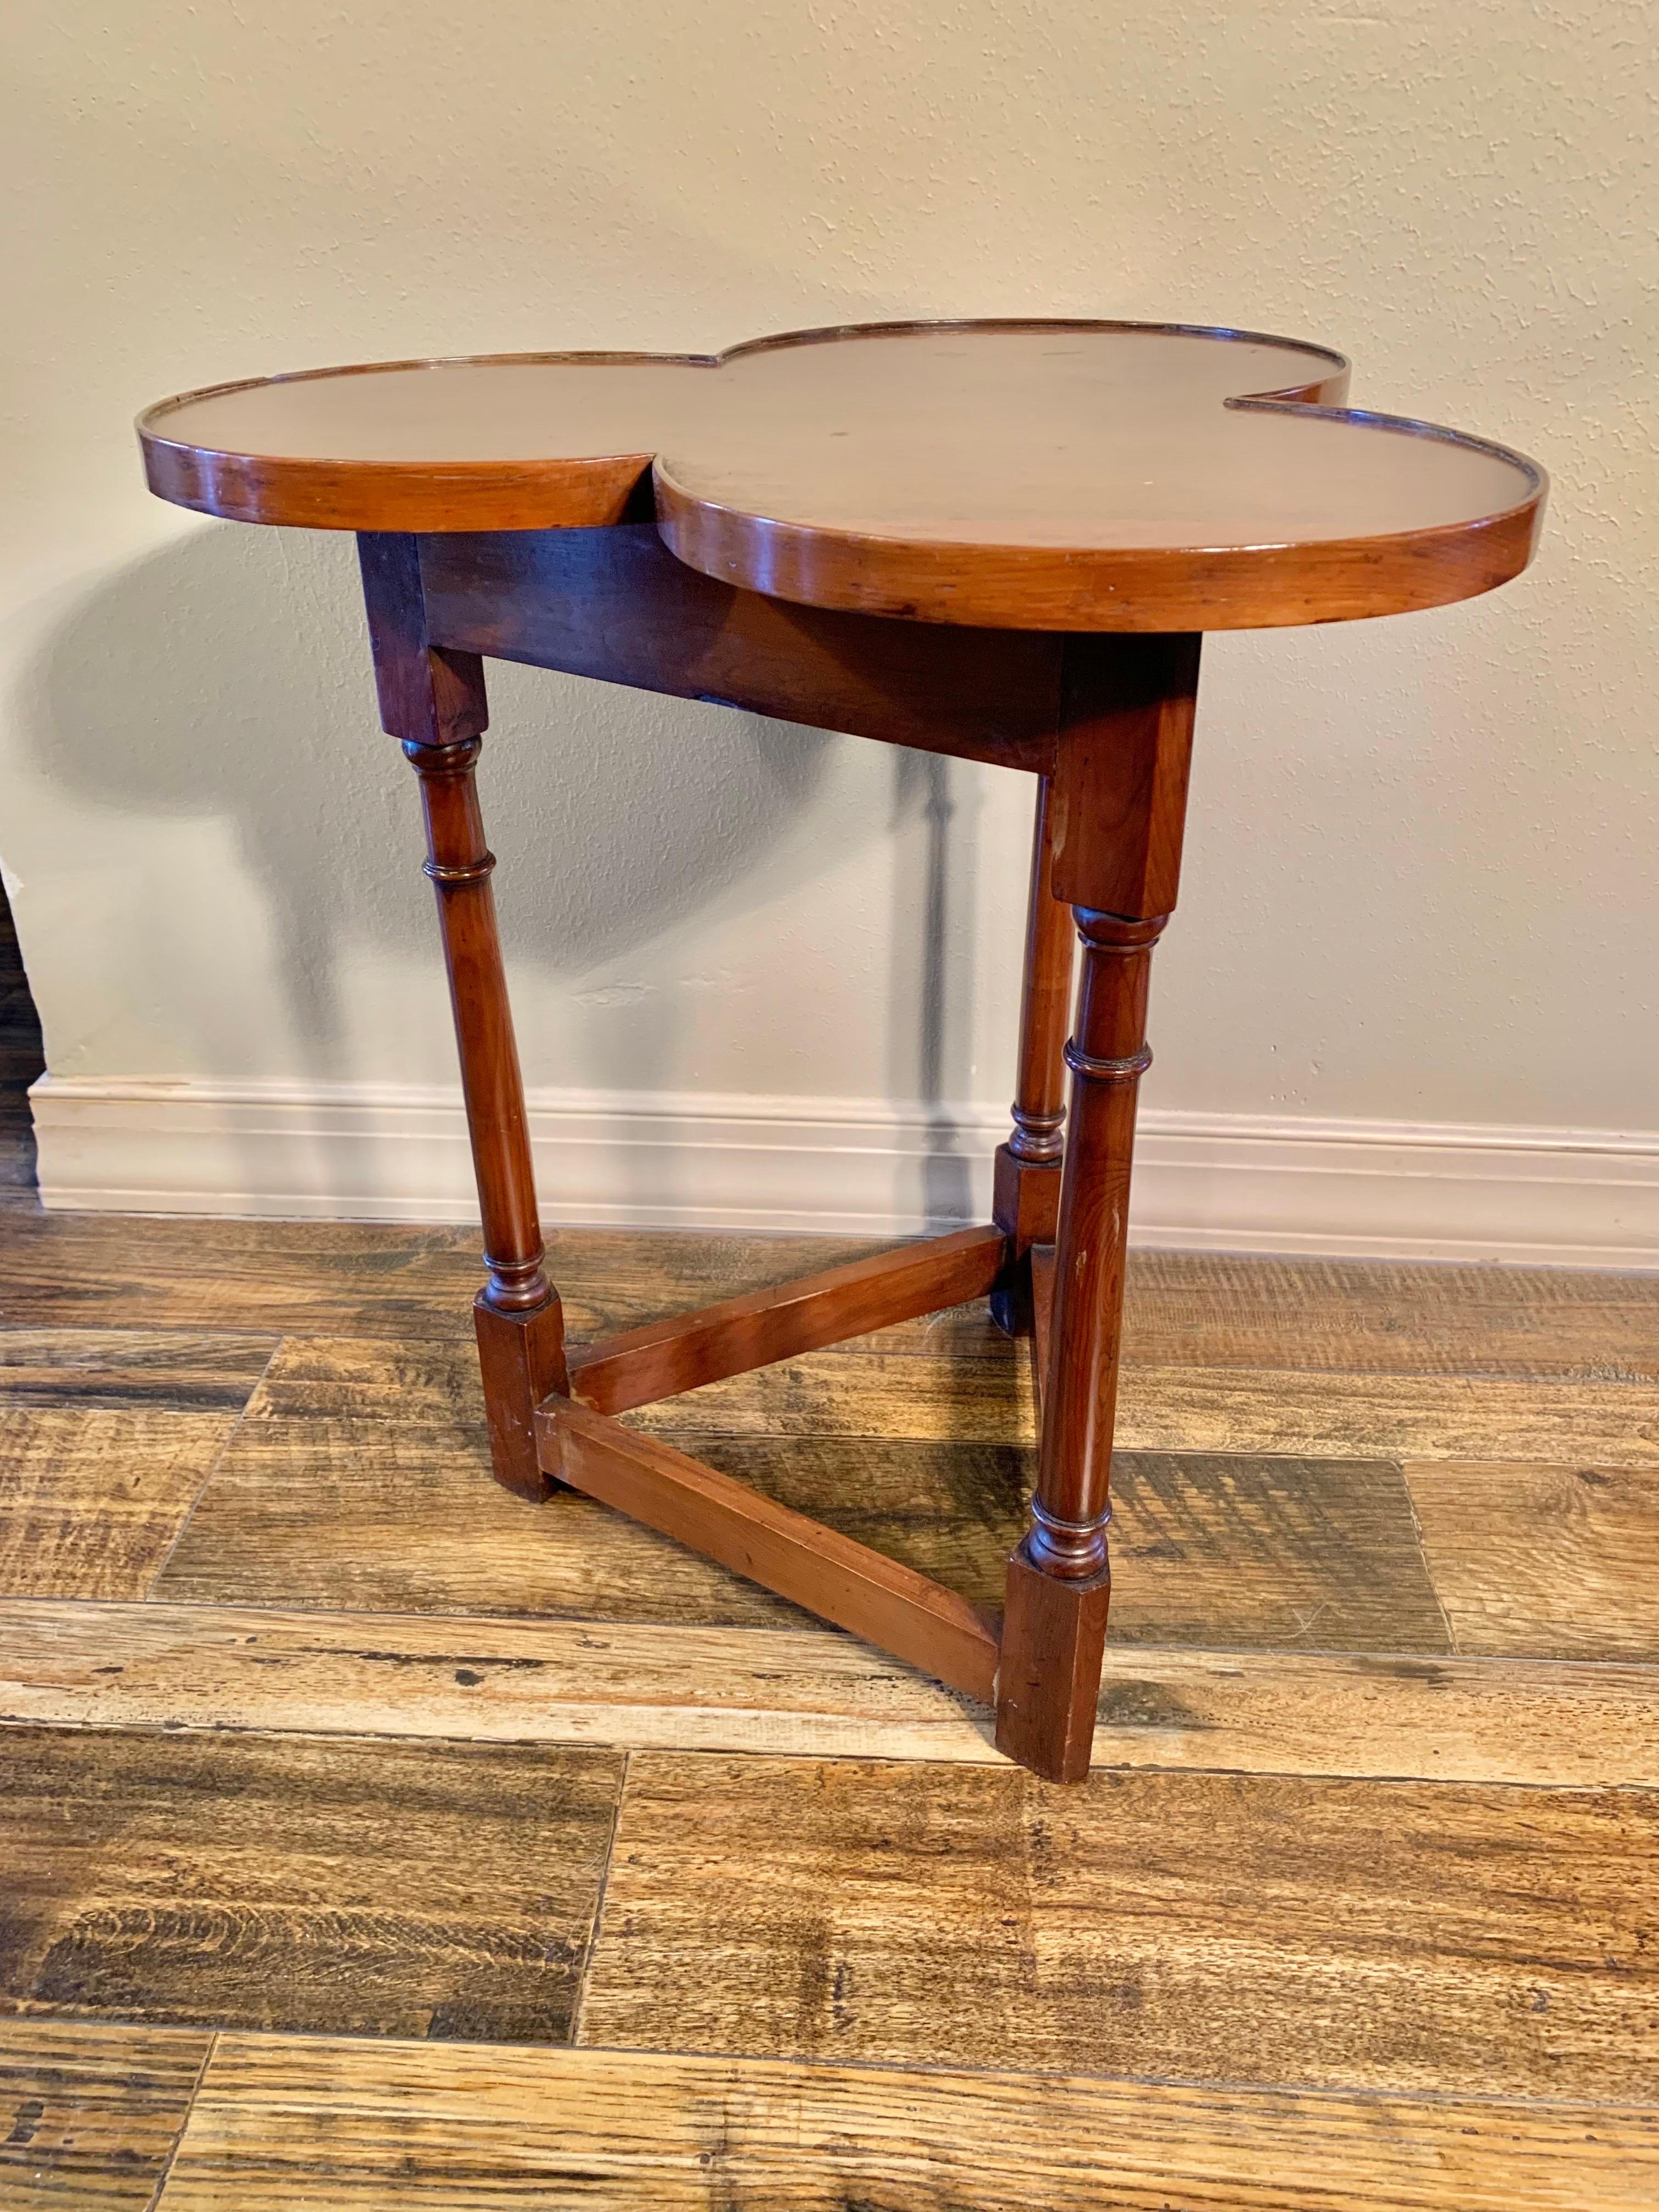 Found in England, this Cricket Clover Side Table was crafted by English artisans from old growth walnut in the early 20th Century. The table features a trefoil clover shaped top resting above a triangular frieze and Cricket base. Each of the three